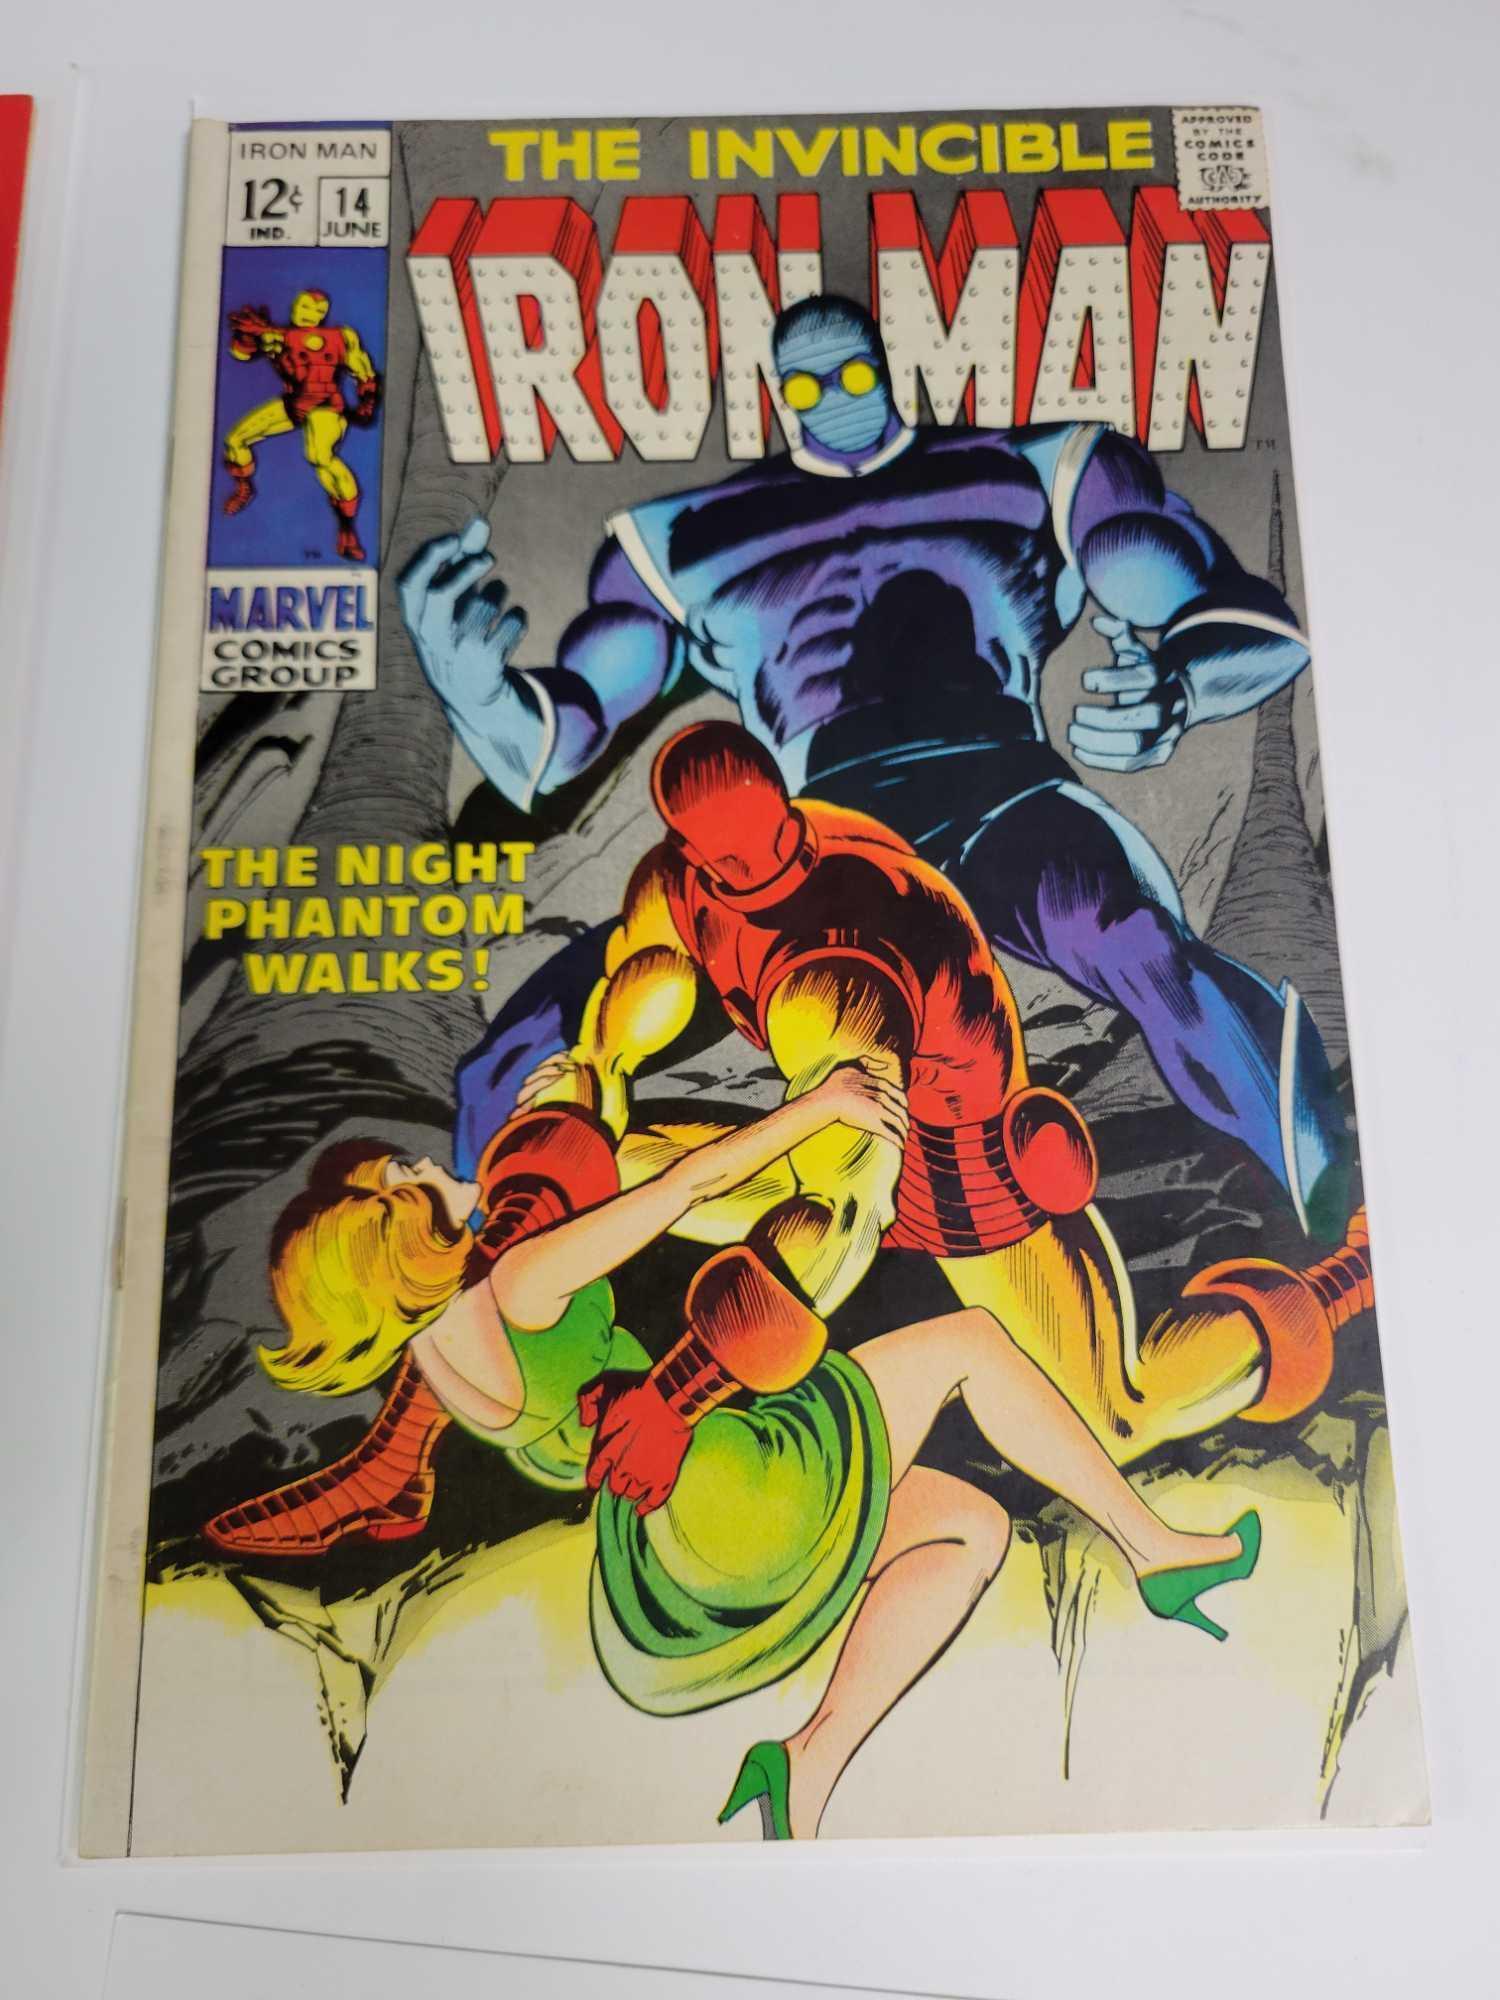 Marvel the Invincible Iron Man 12c #13, 14, 15 and 86 issues